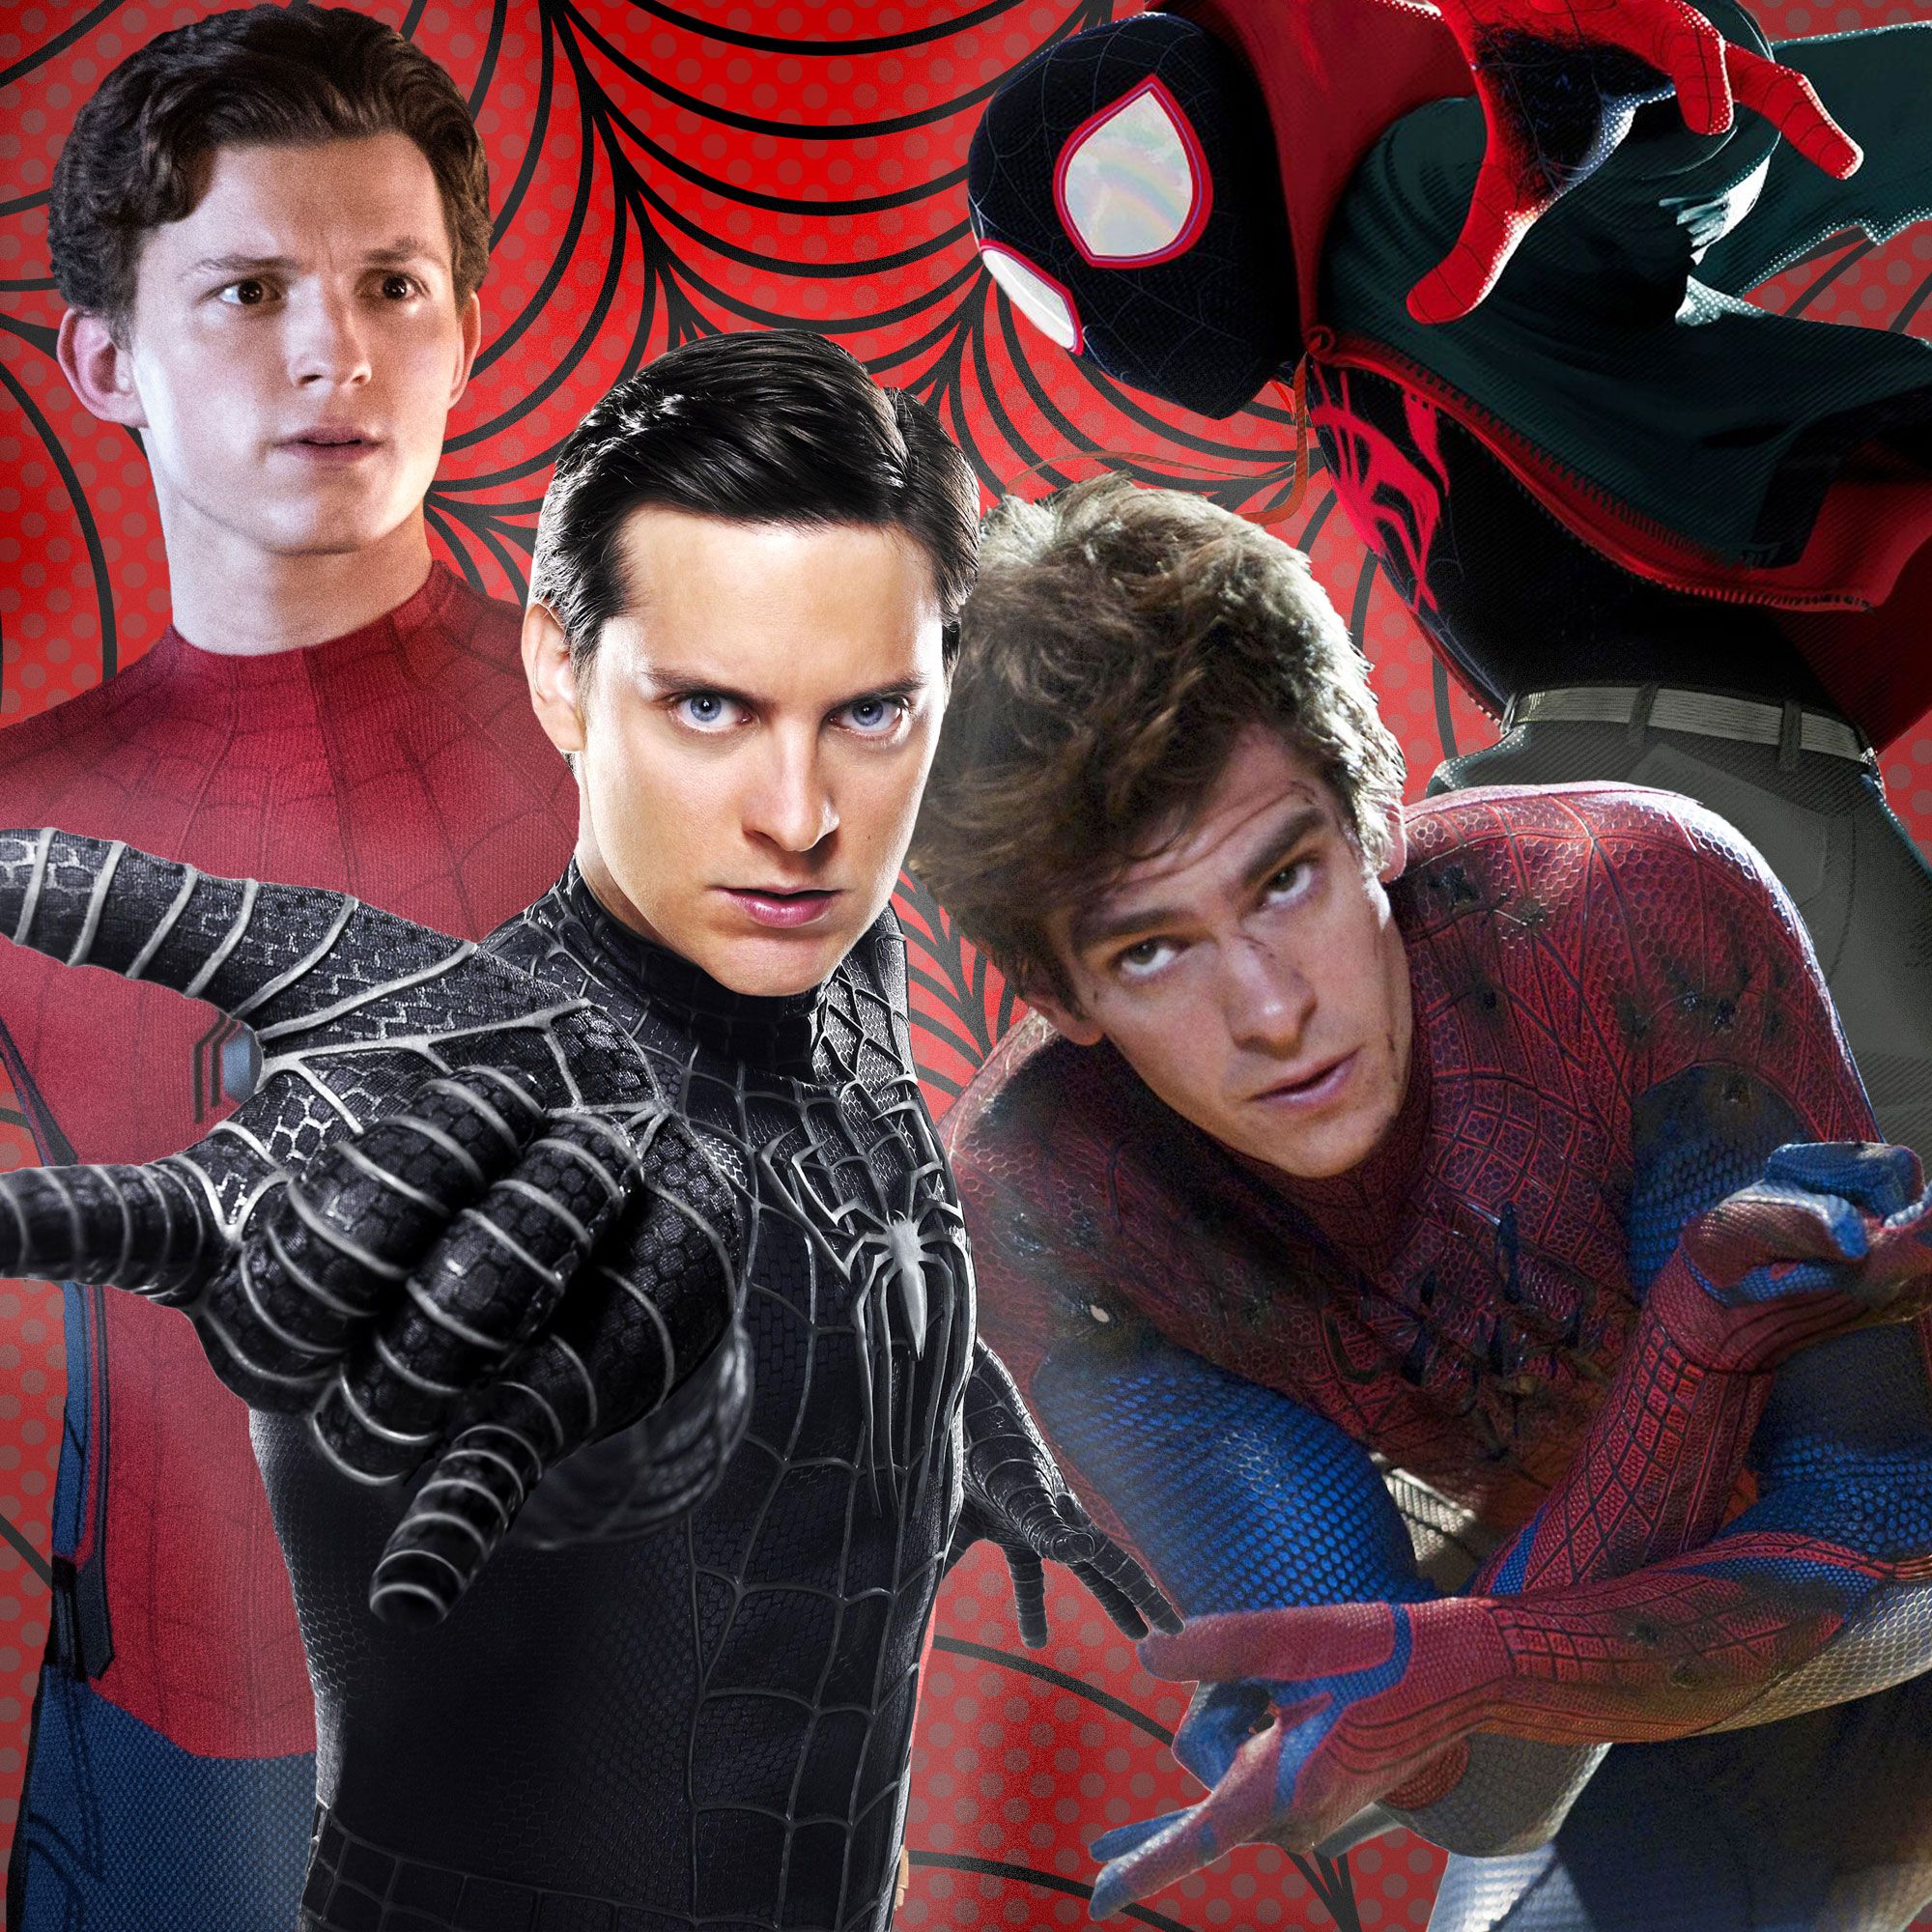 The Spider-Man Movies In Order, From Tobey Maguire's Films To Marvel's